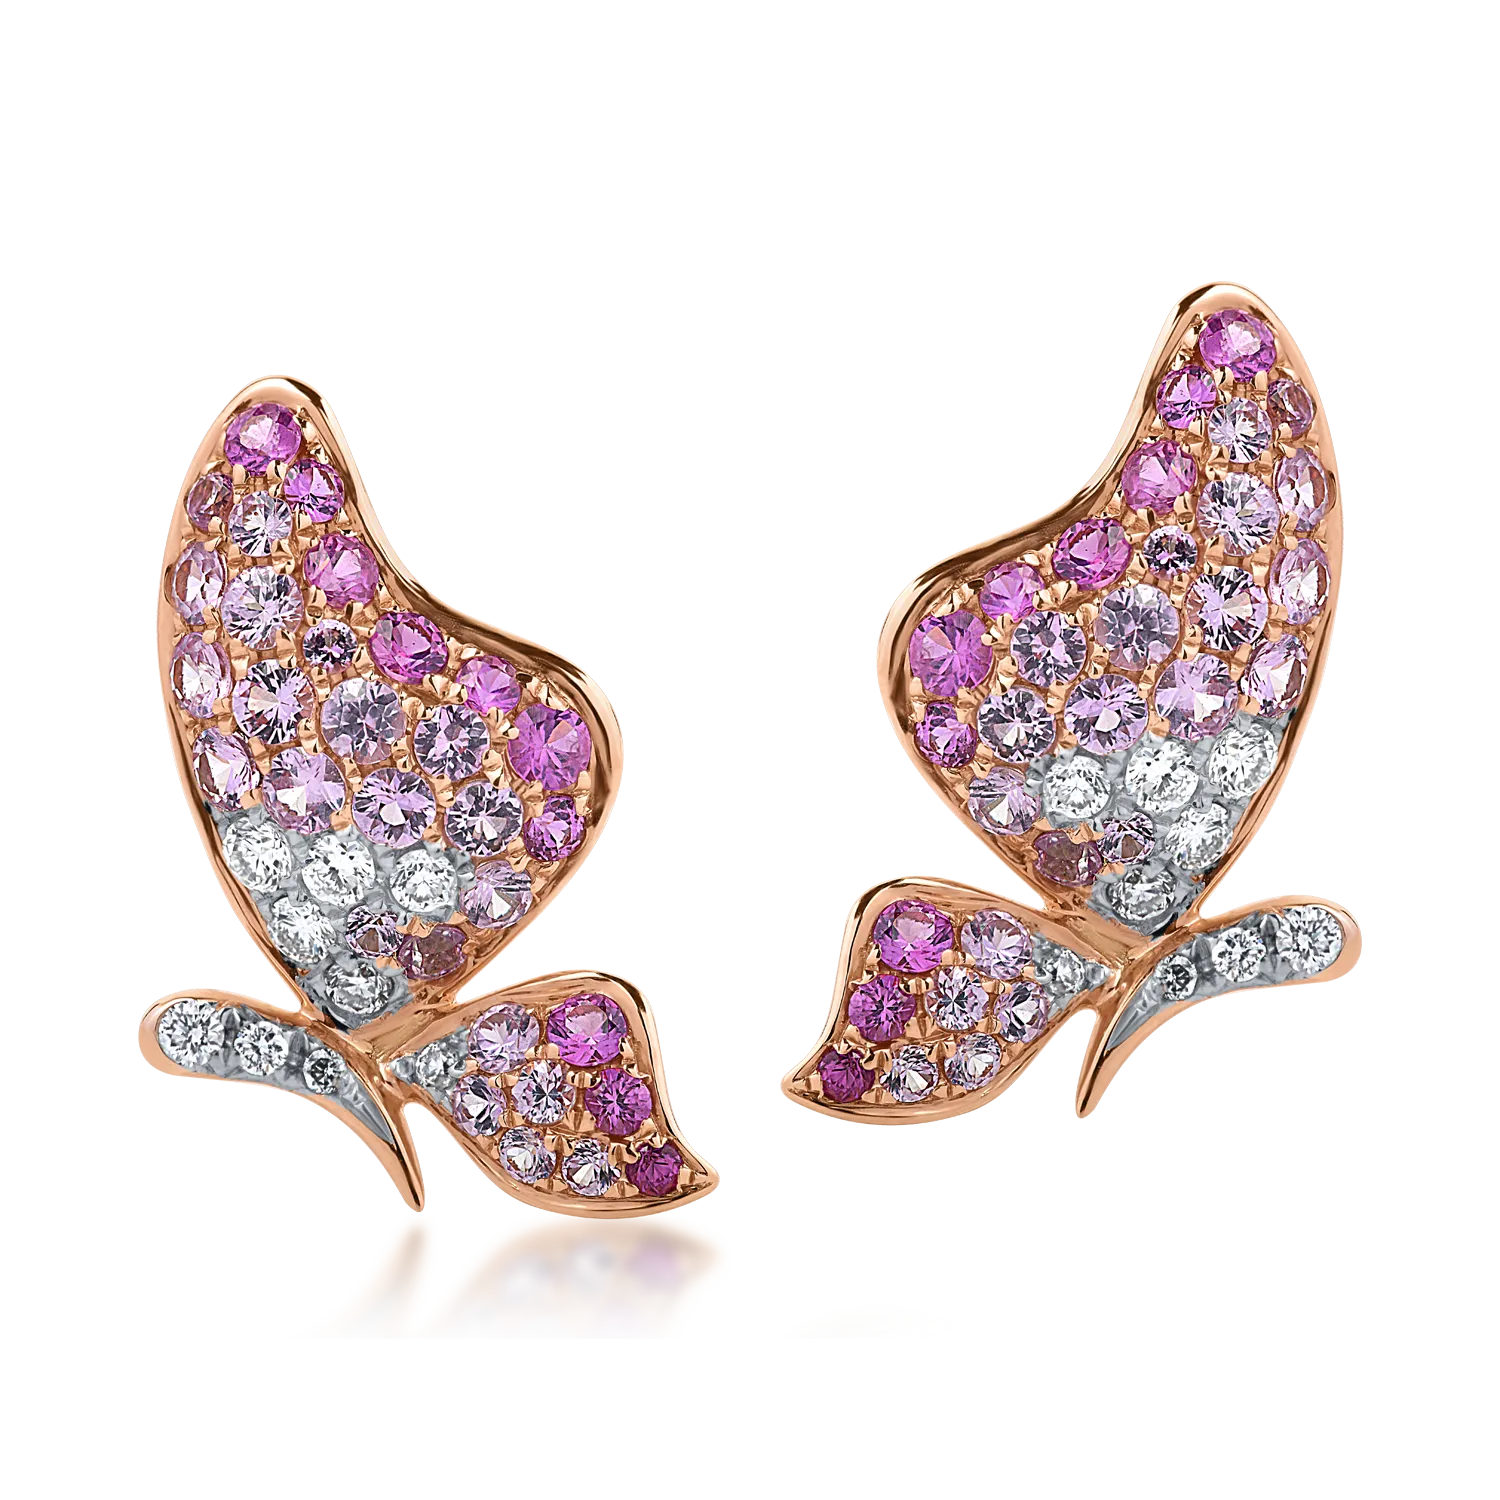 Rose gold earrings with 1.09ct sapphires and 0.2ct diamonds